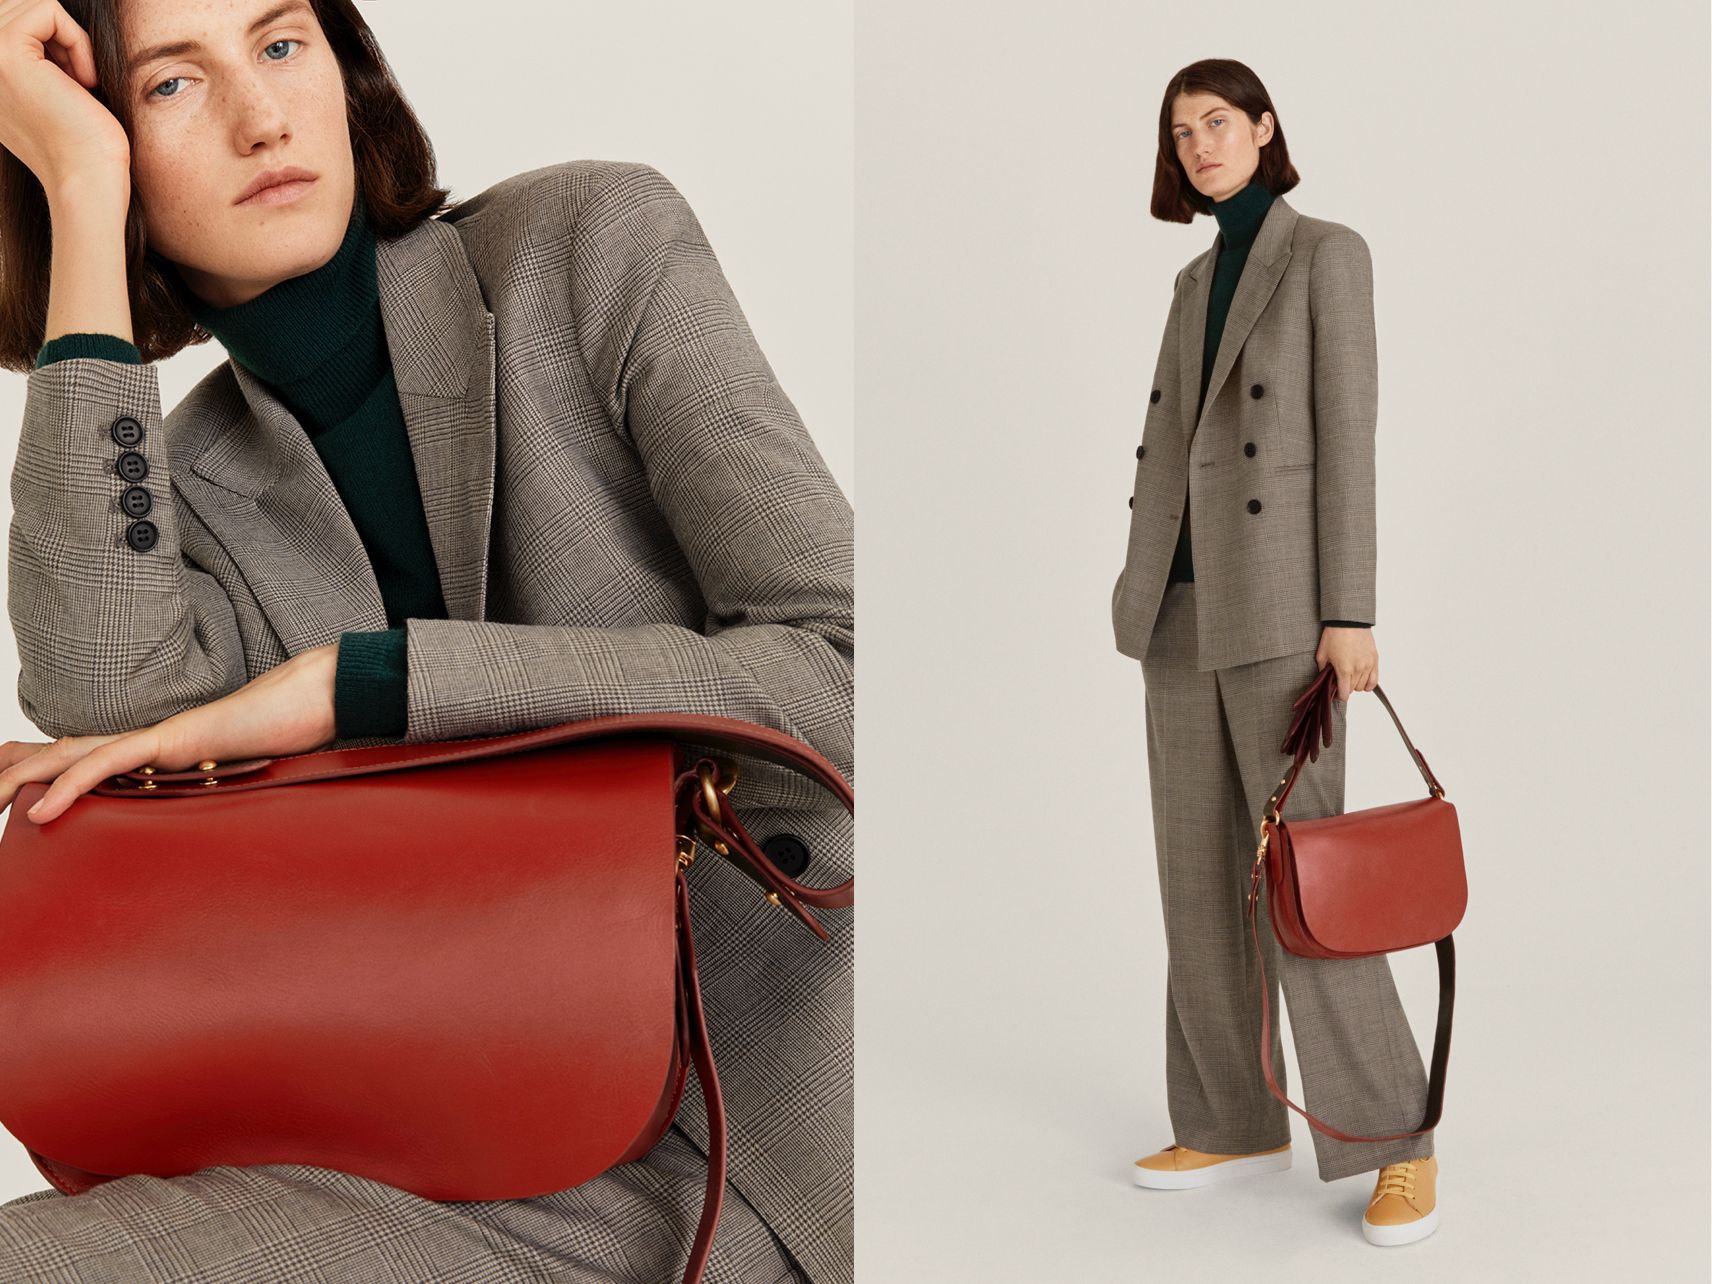 Woman in a grey suit with red bag